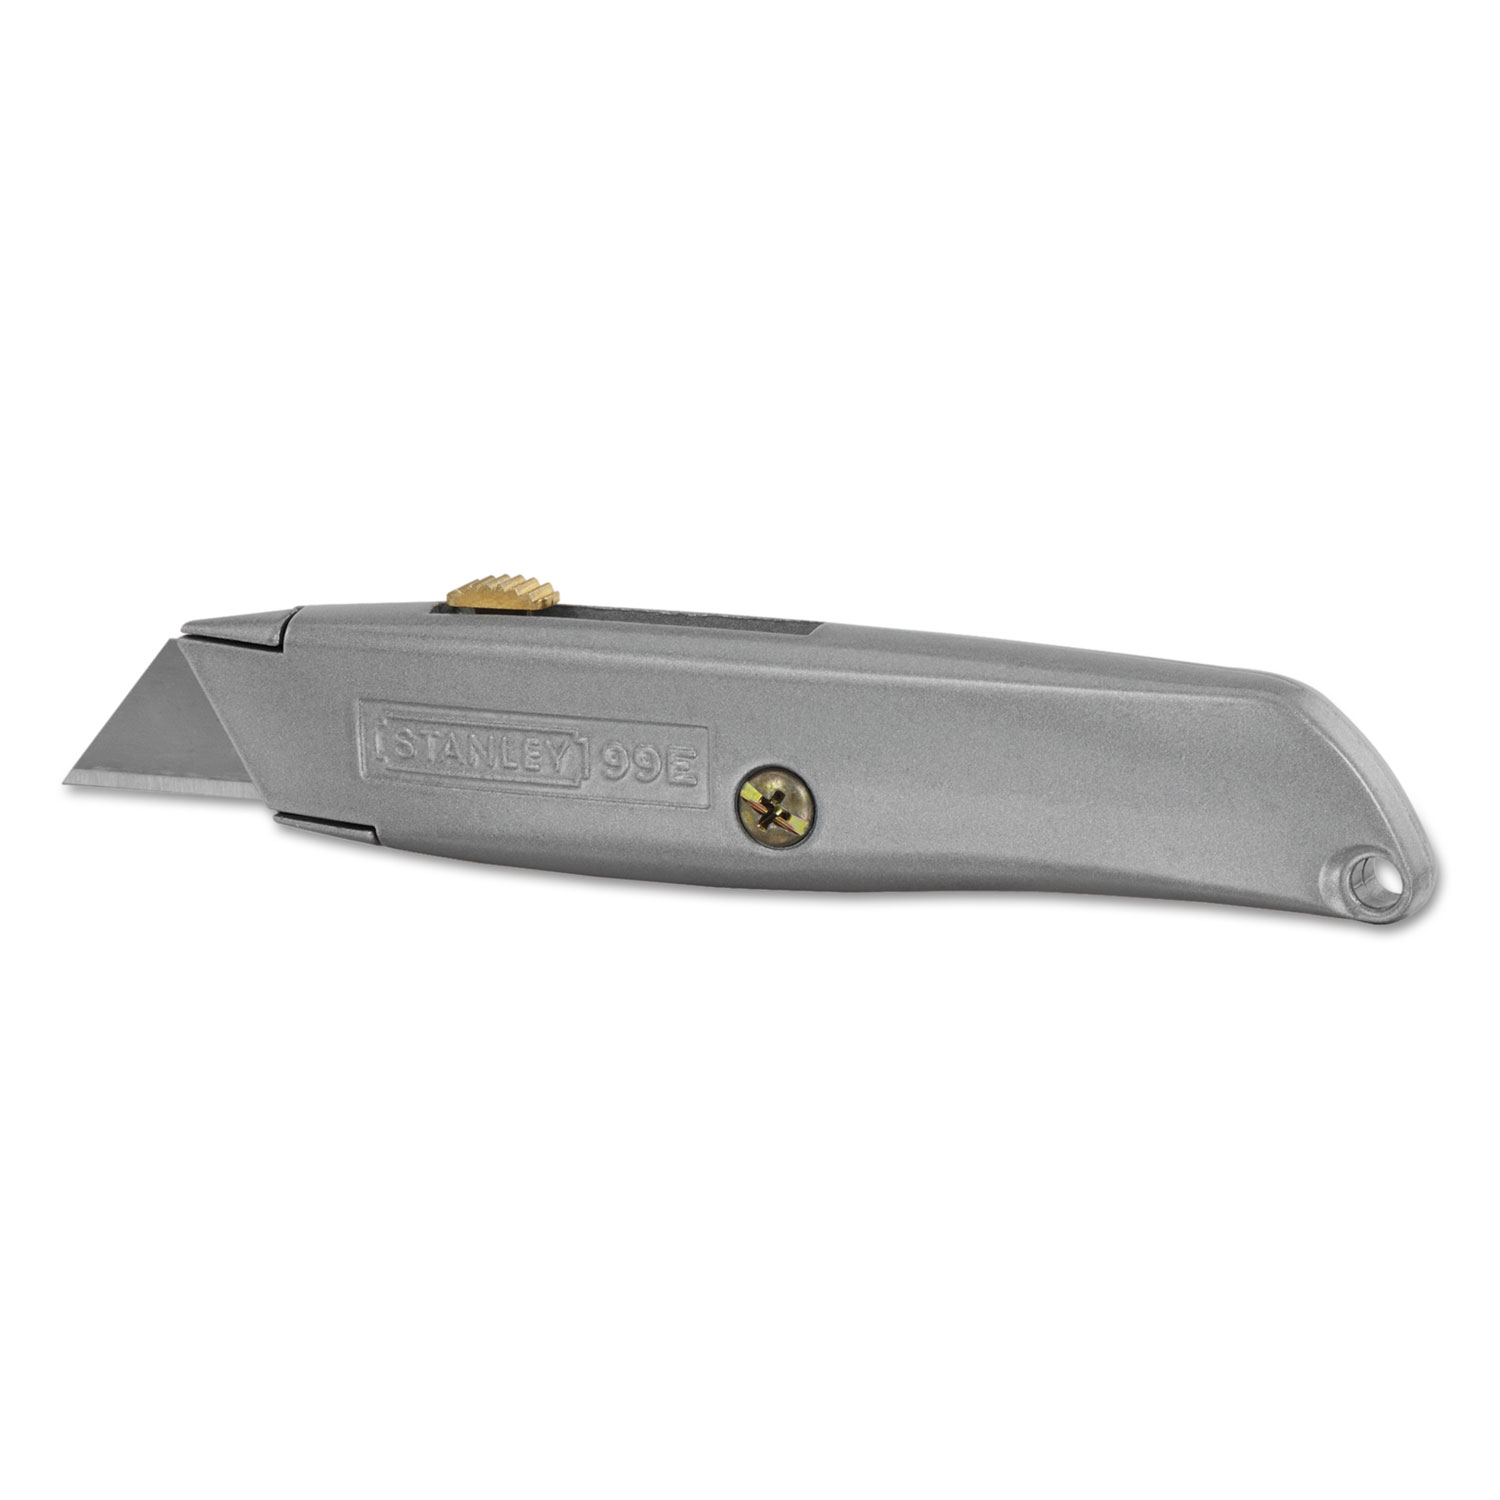  Stanley 10-099 Classic 99 Utility Knife w/Retractable Blade, Gray (BOS10099) 